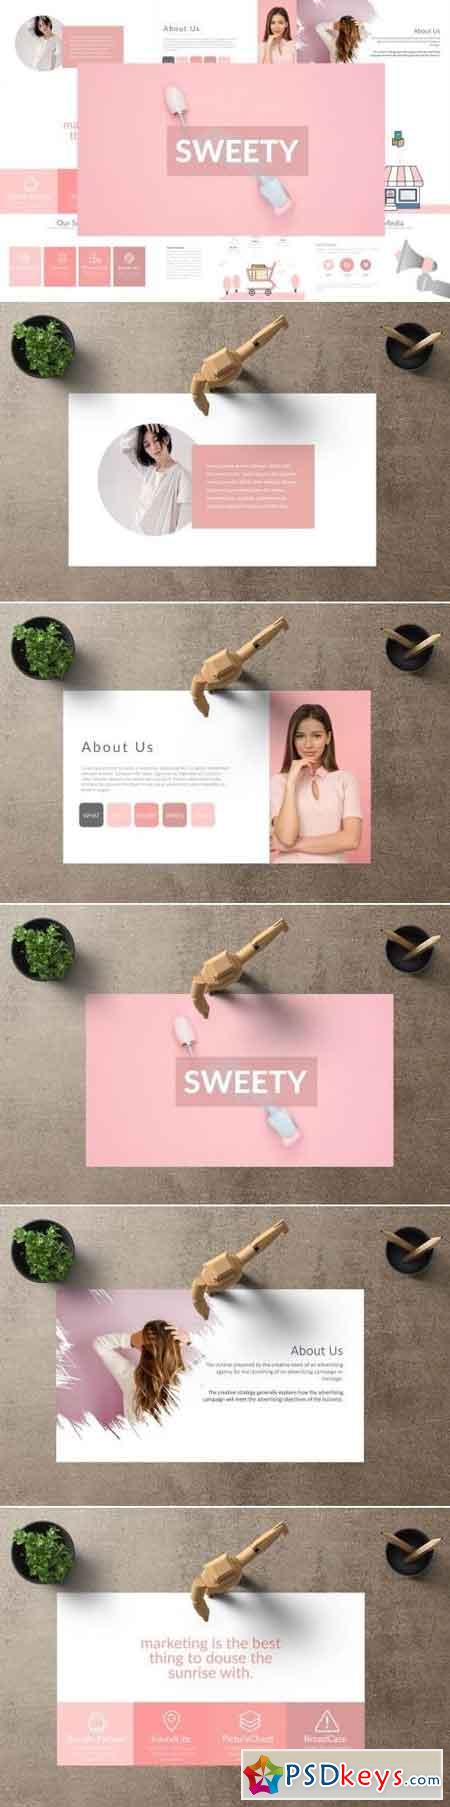 SWEETY Powerpoint Template